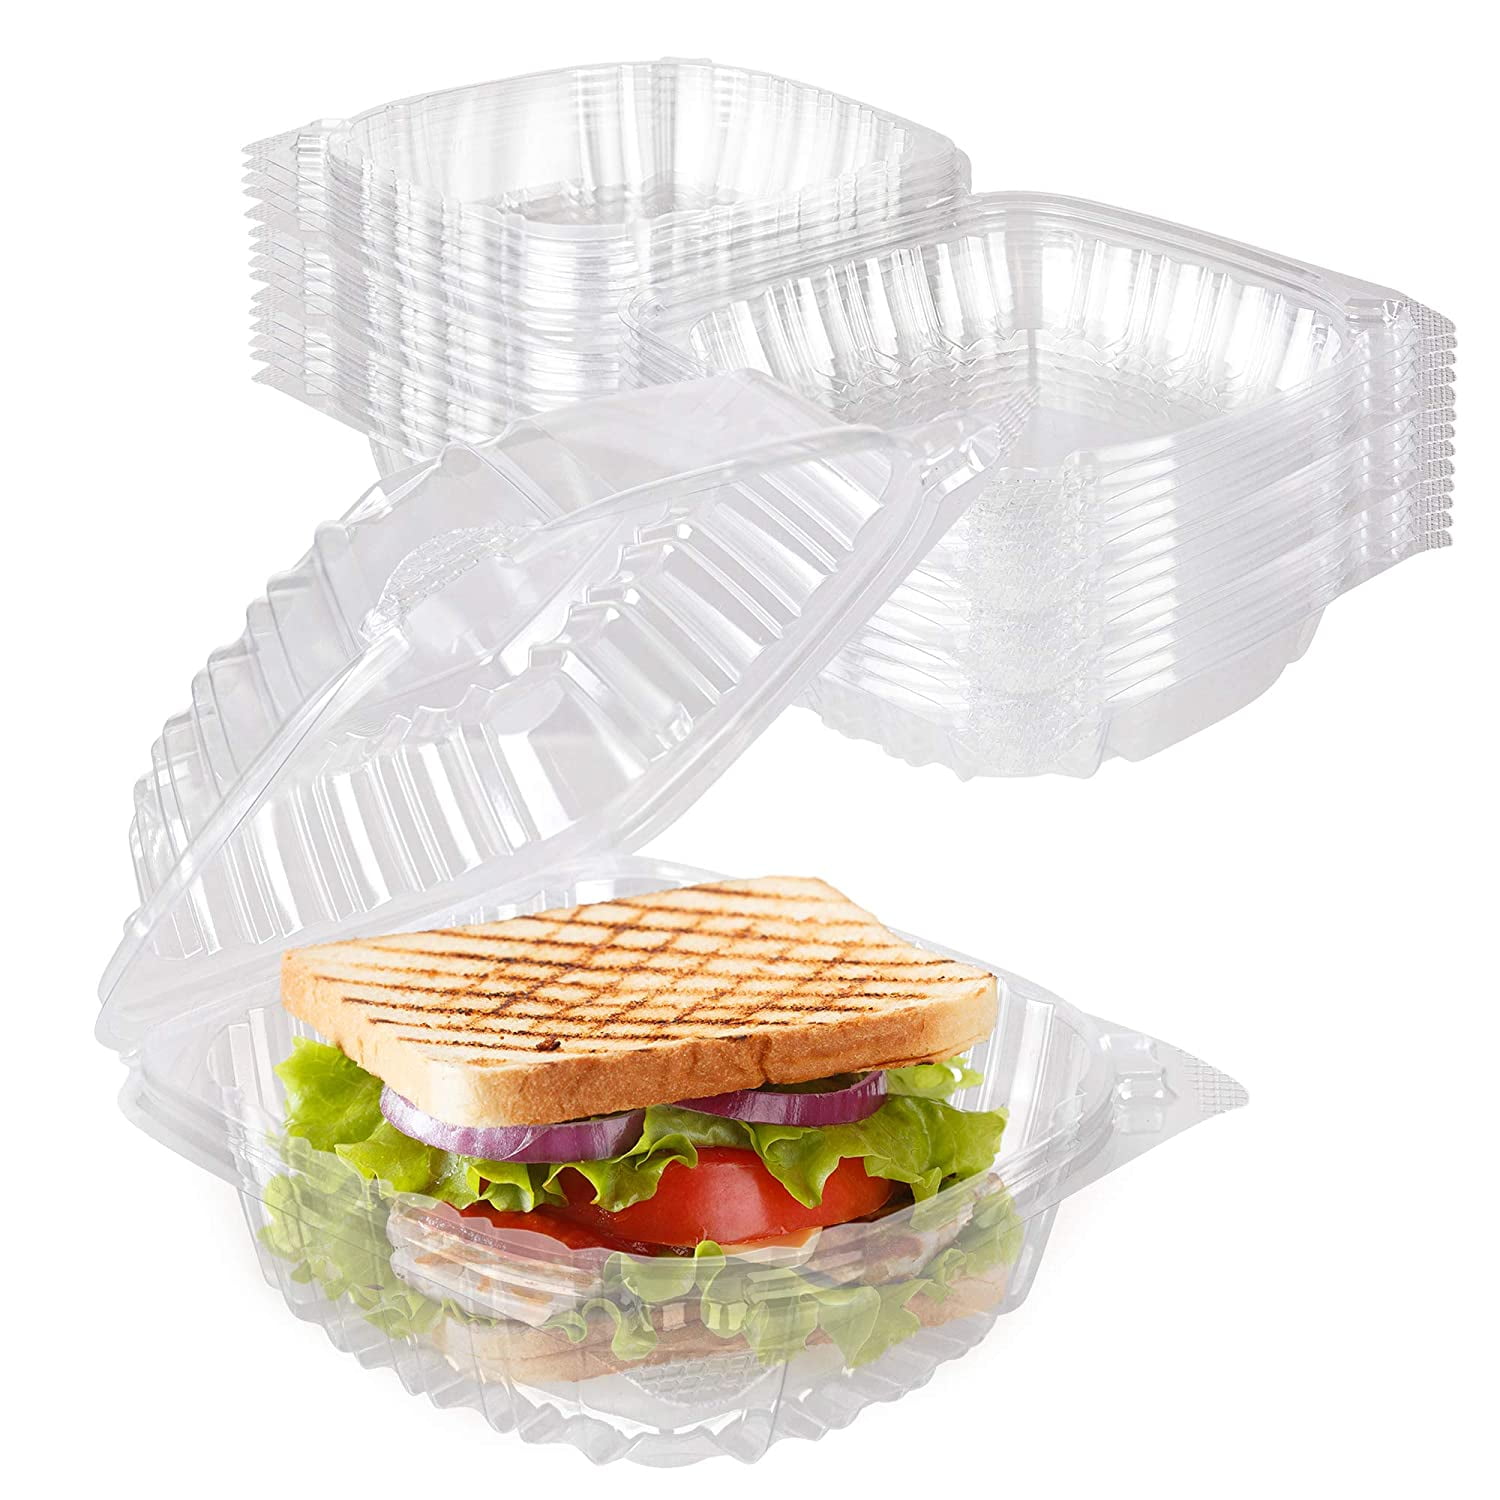 Details about   1000 Pack 6 x 6 Clear Plastic Clam Shell Take Out Food Container 